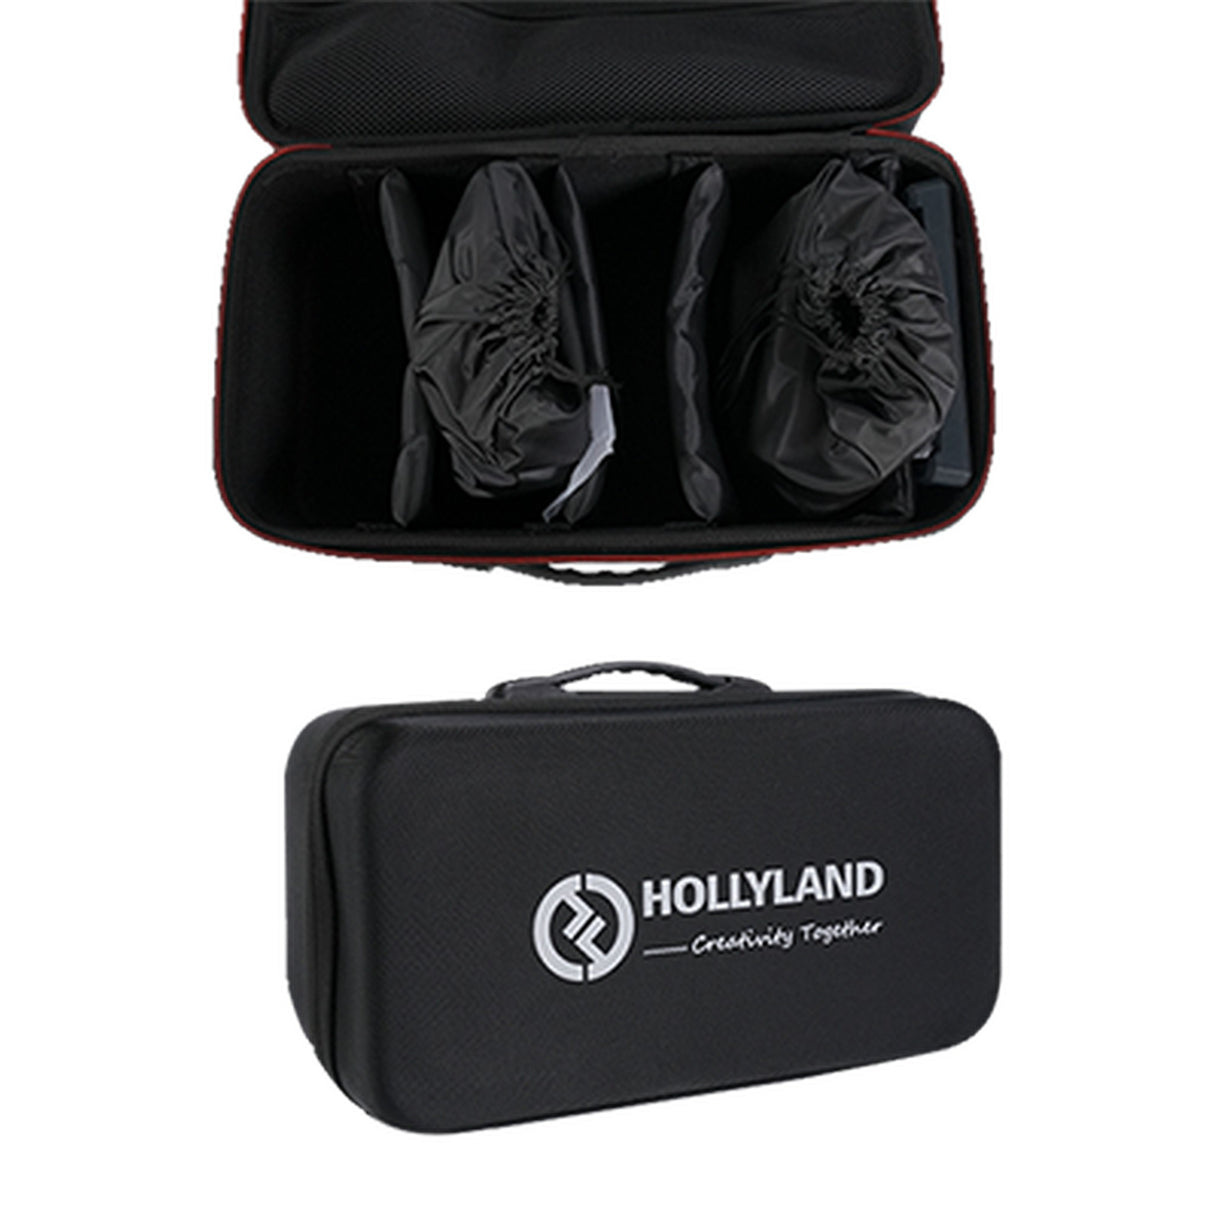 Hollyland Solidcom C1 Pro Carry Case for 4 and 6 Headset Systems